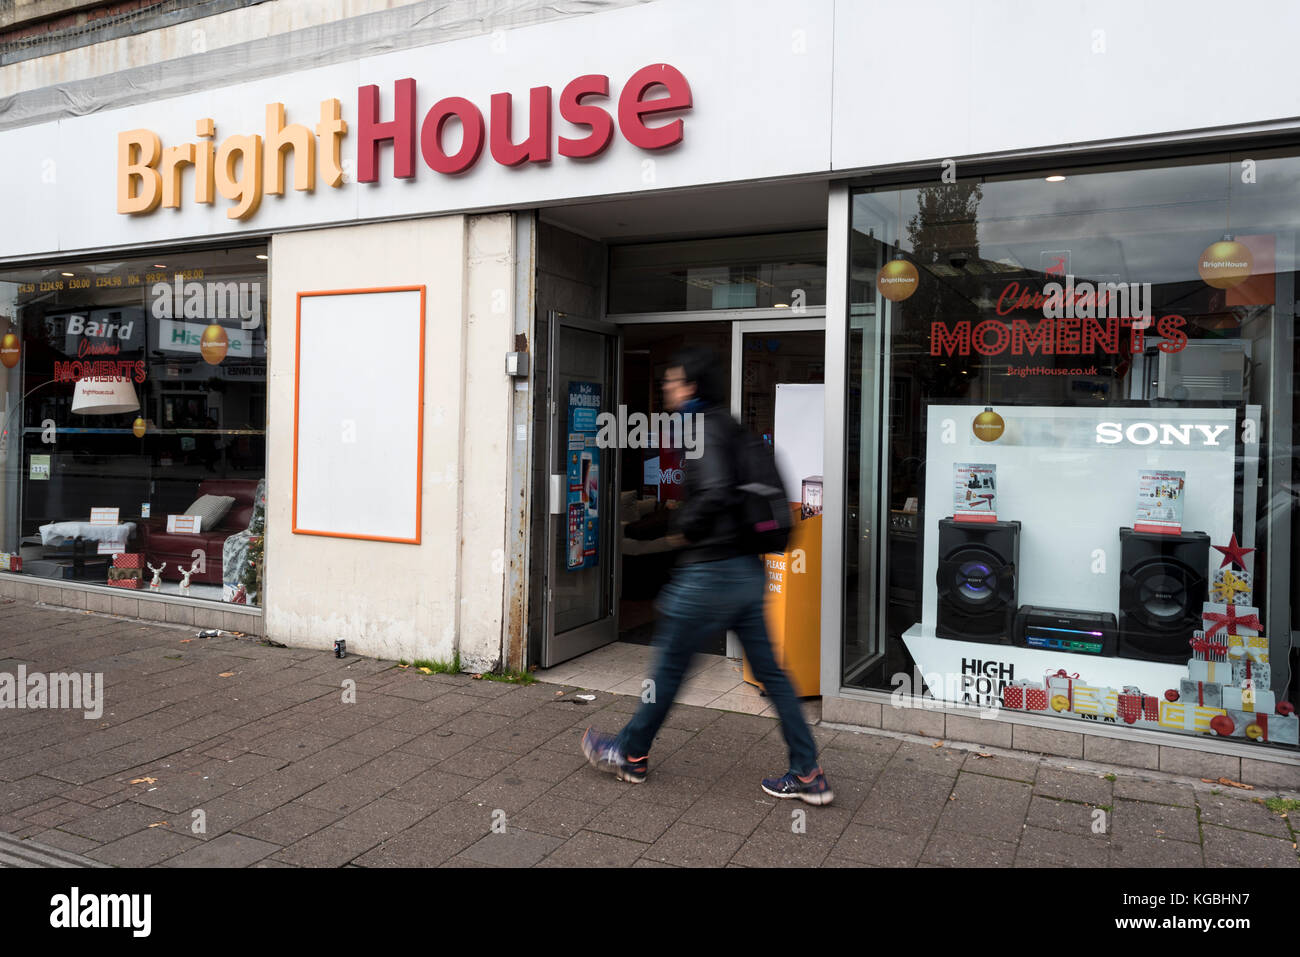 Cardiff, Wales, UK. 6th Nov, 2017. Hire purchase retailer BrightHouse store front in Cardiff. The retailer which has had to reimburse £14.8m following an investigation by the FCA earlier this year is mentioned in the release of the Paradise Papers with Queen Elizabeth II making a £10m private offshore investment via the Duchy of Lancaster who oversee her estate's investments. Picture Credit: IAN HOMER/Alamy Live News Stock Photo